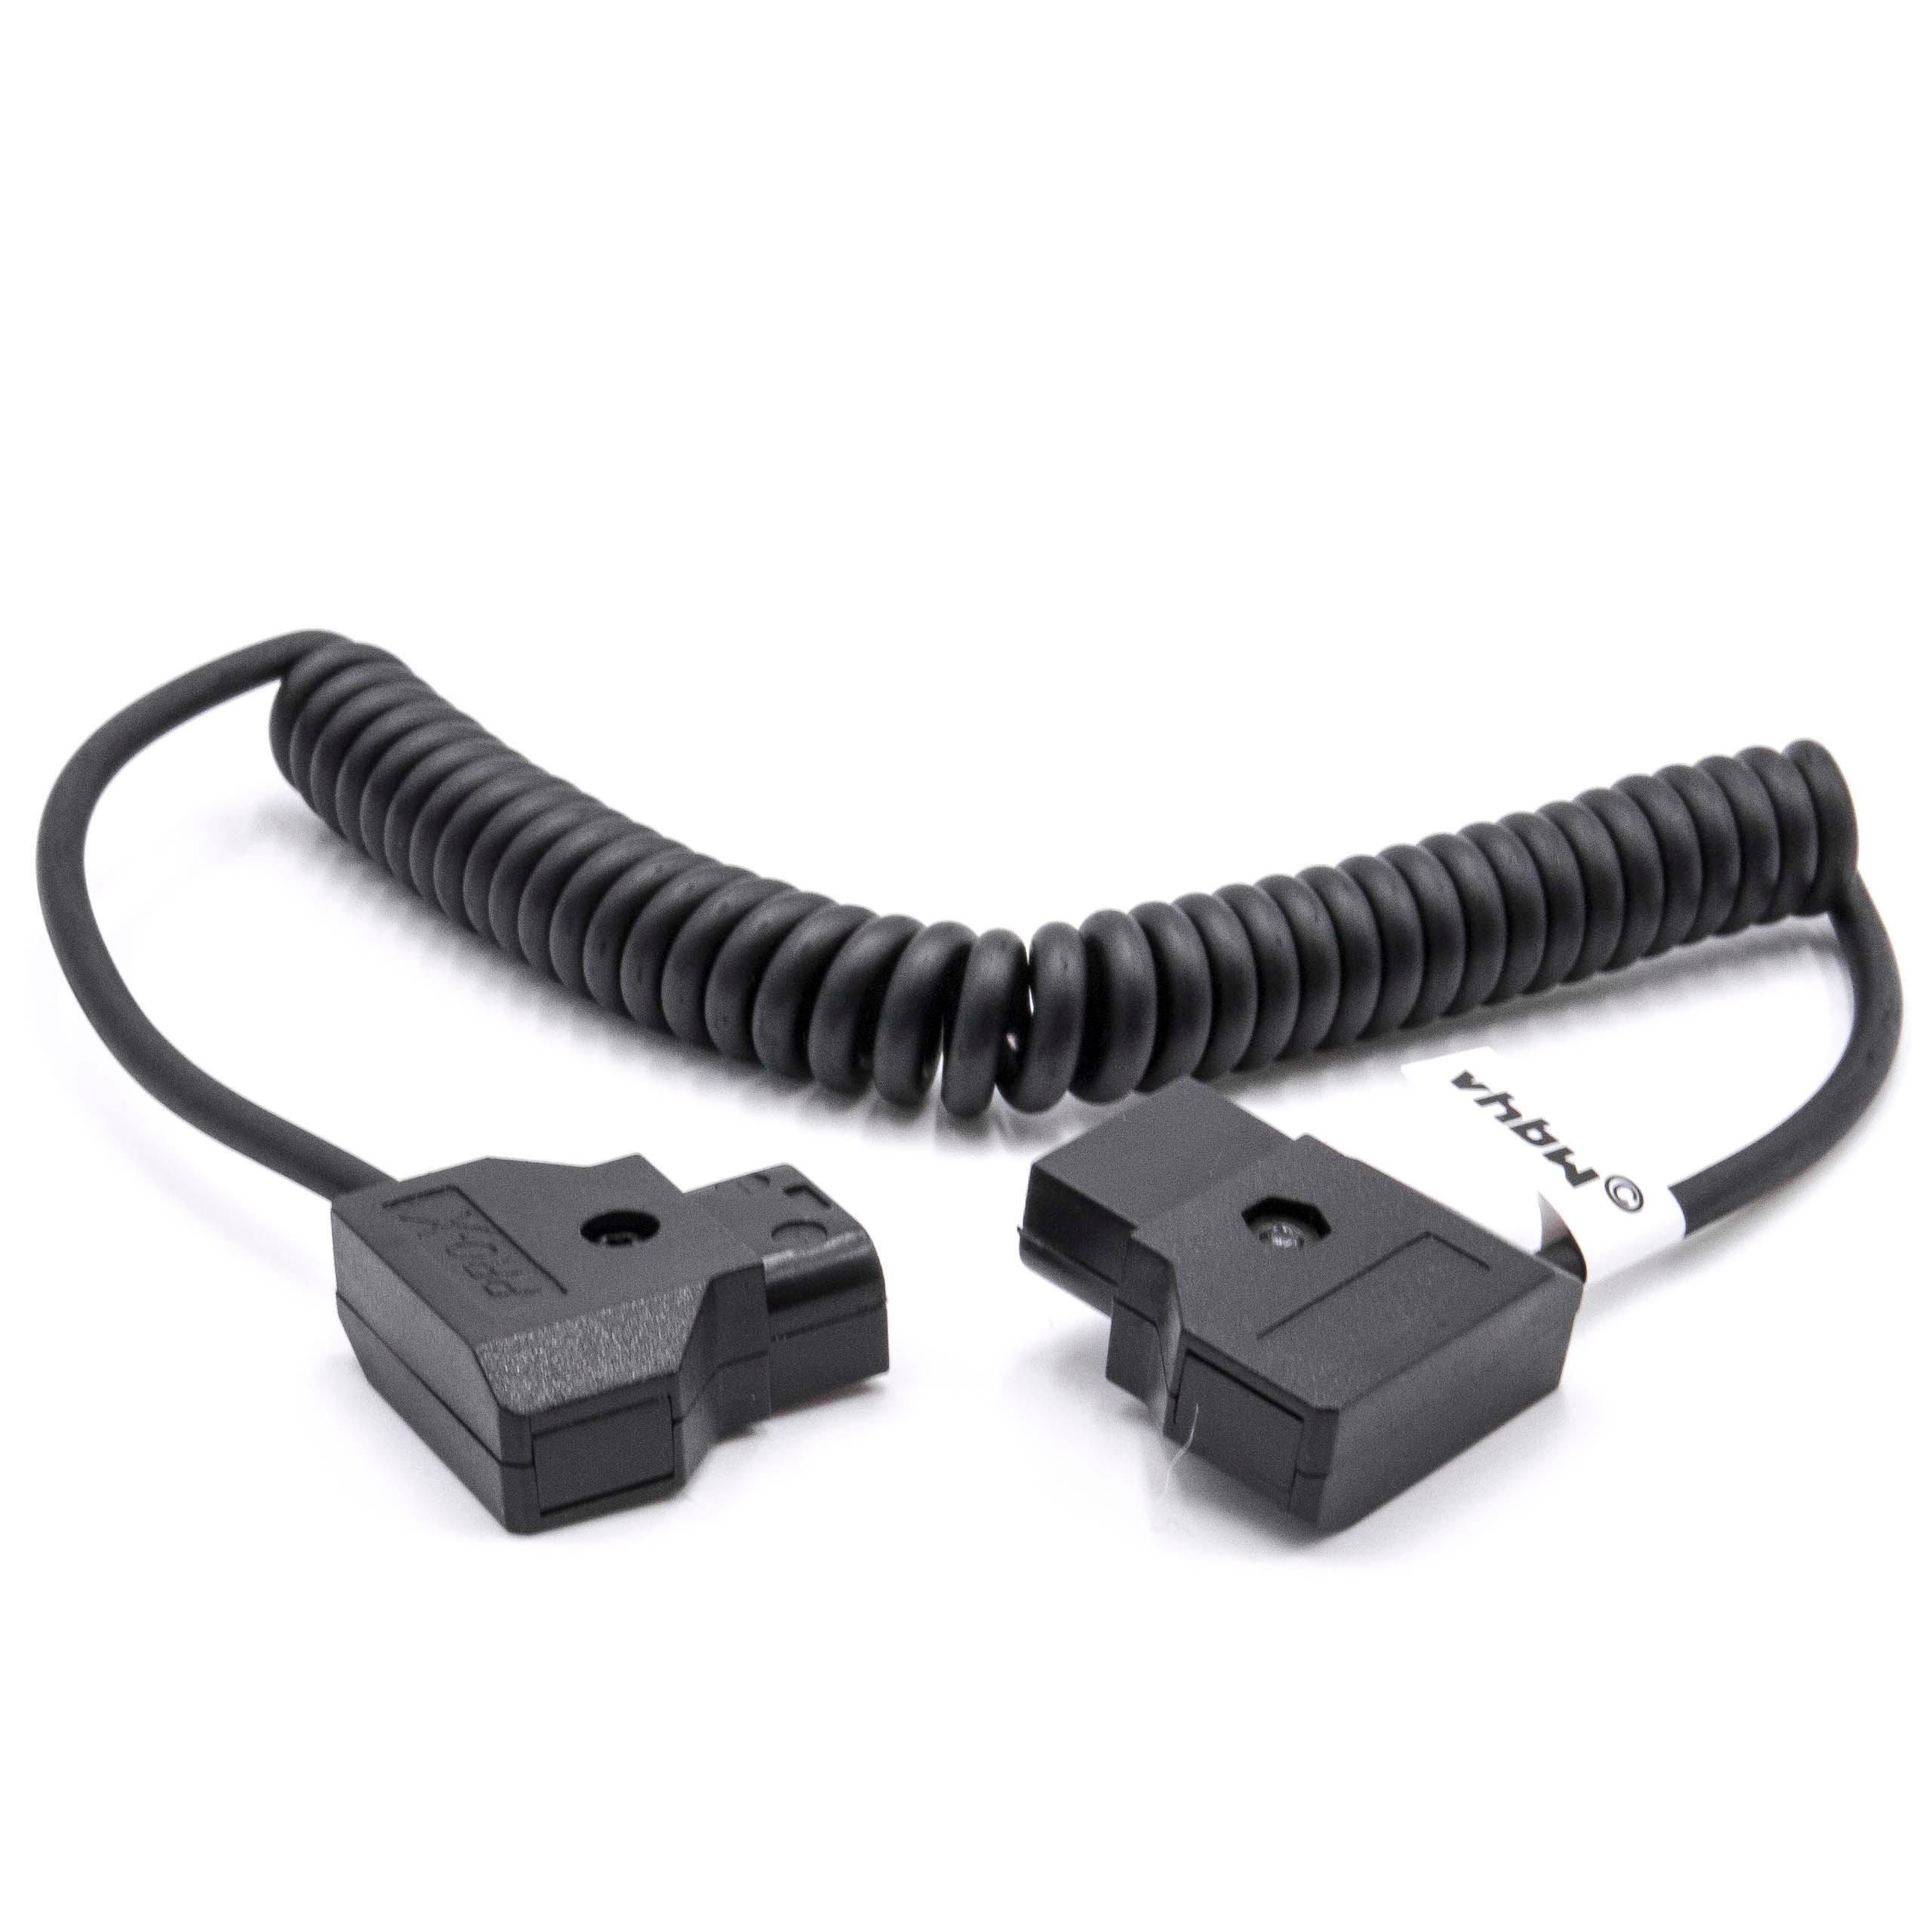 Adapter Cable D-Tap (male) to D-Tap (male) suitable for Anton Bauer D-Tap, Dionic Camera - Black